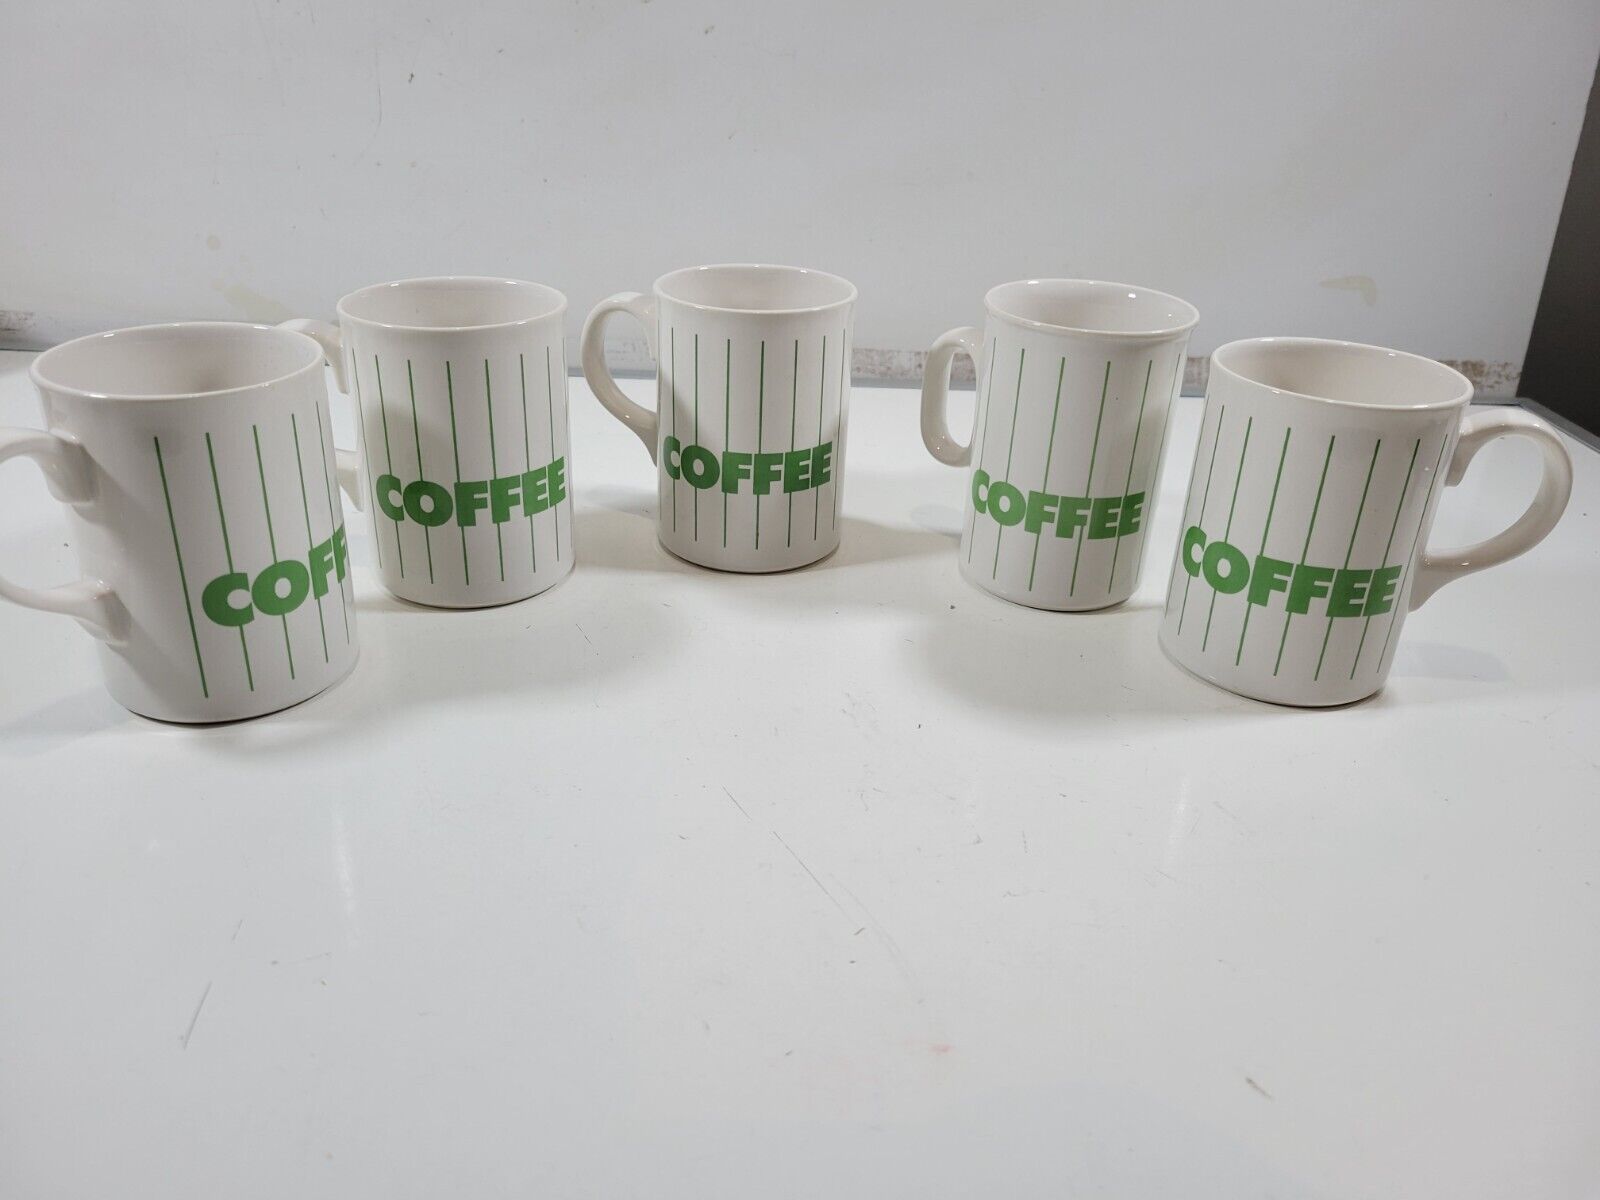 Rare 1970's/80s Vintage Hornsea Pottery England 5 Coffee Mugs Cup - Some chips